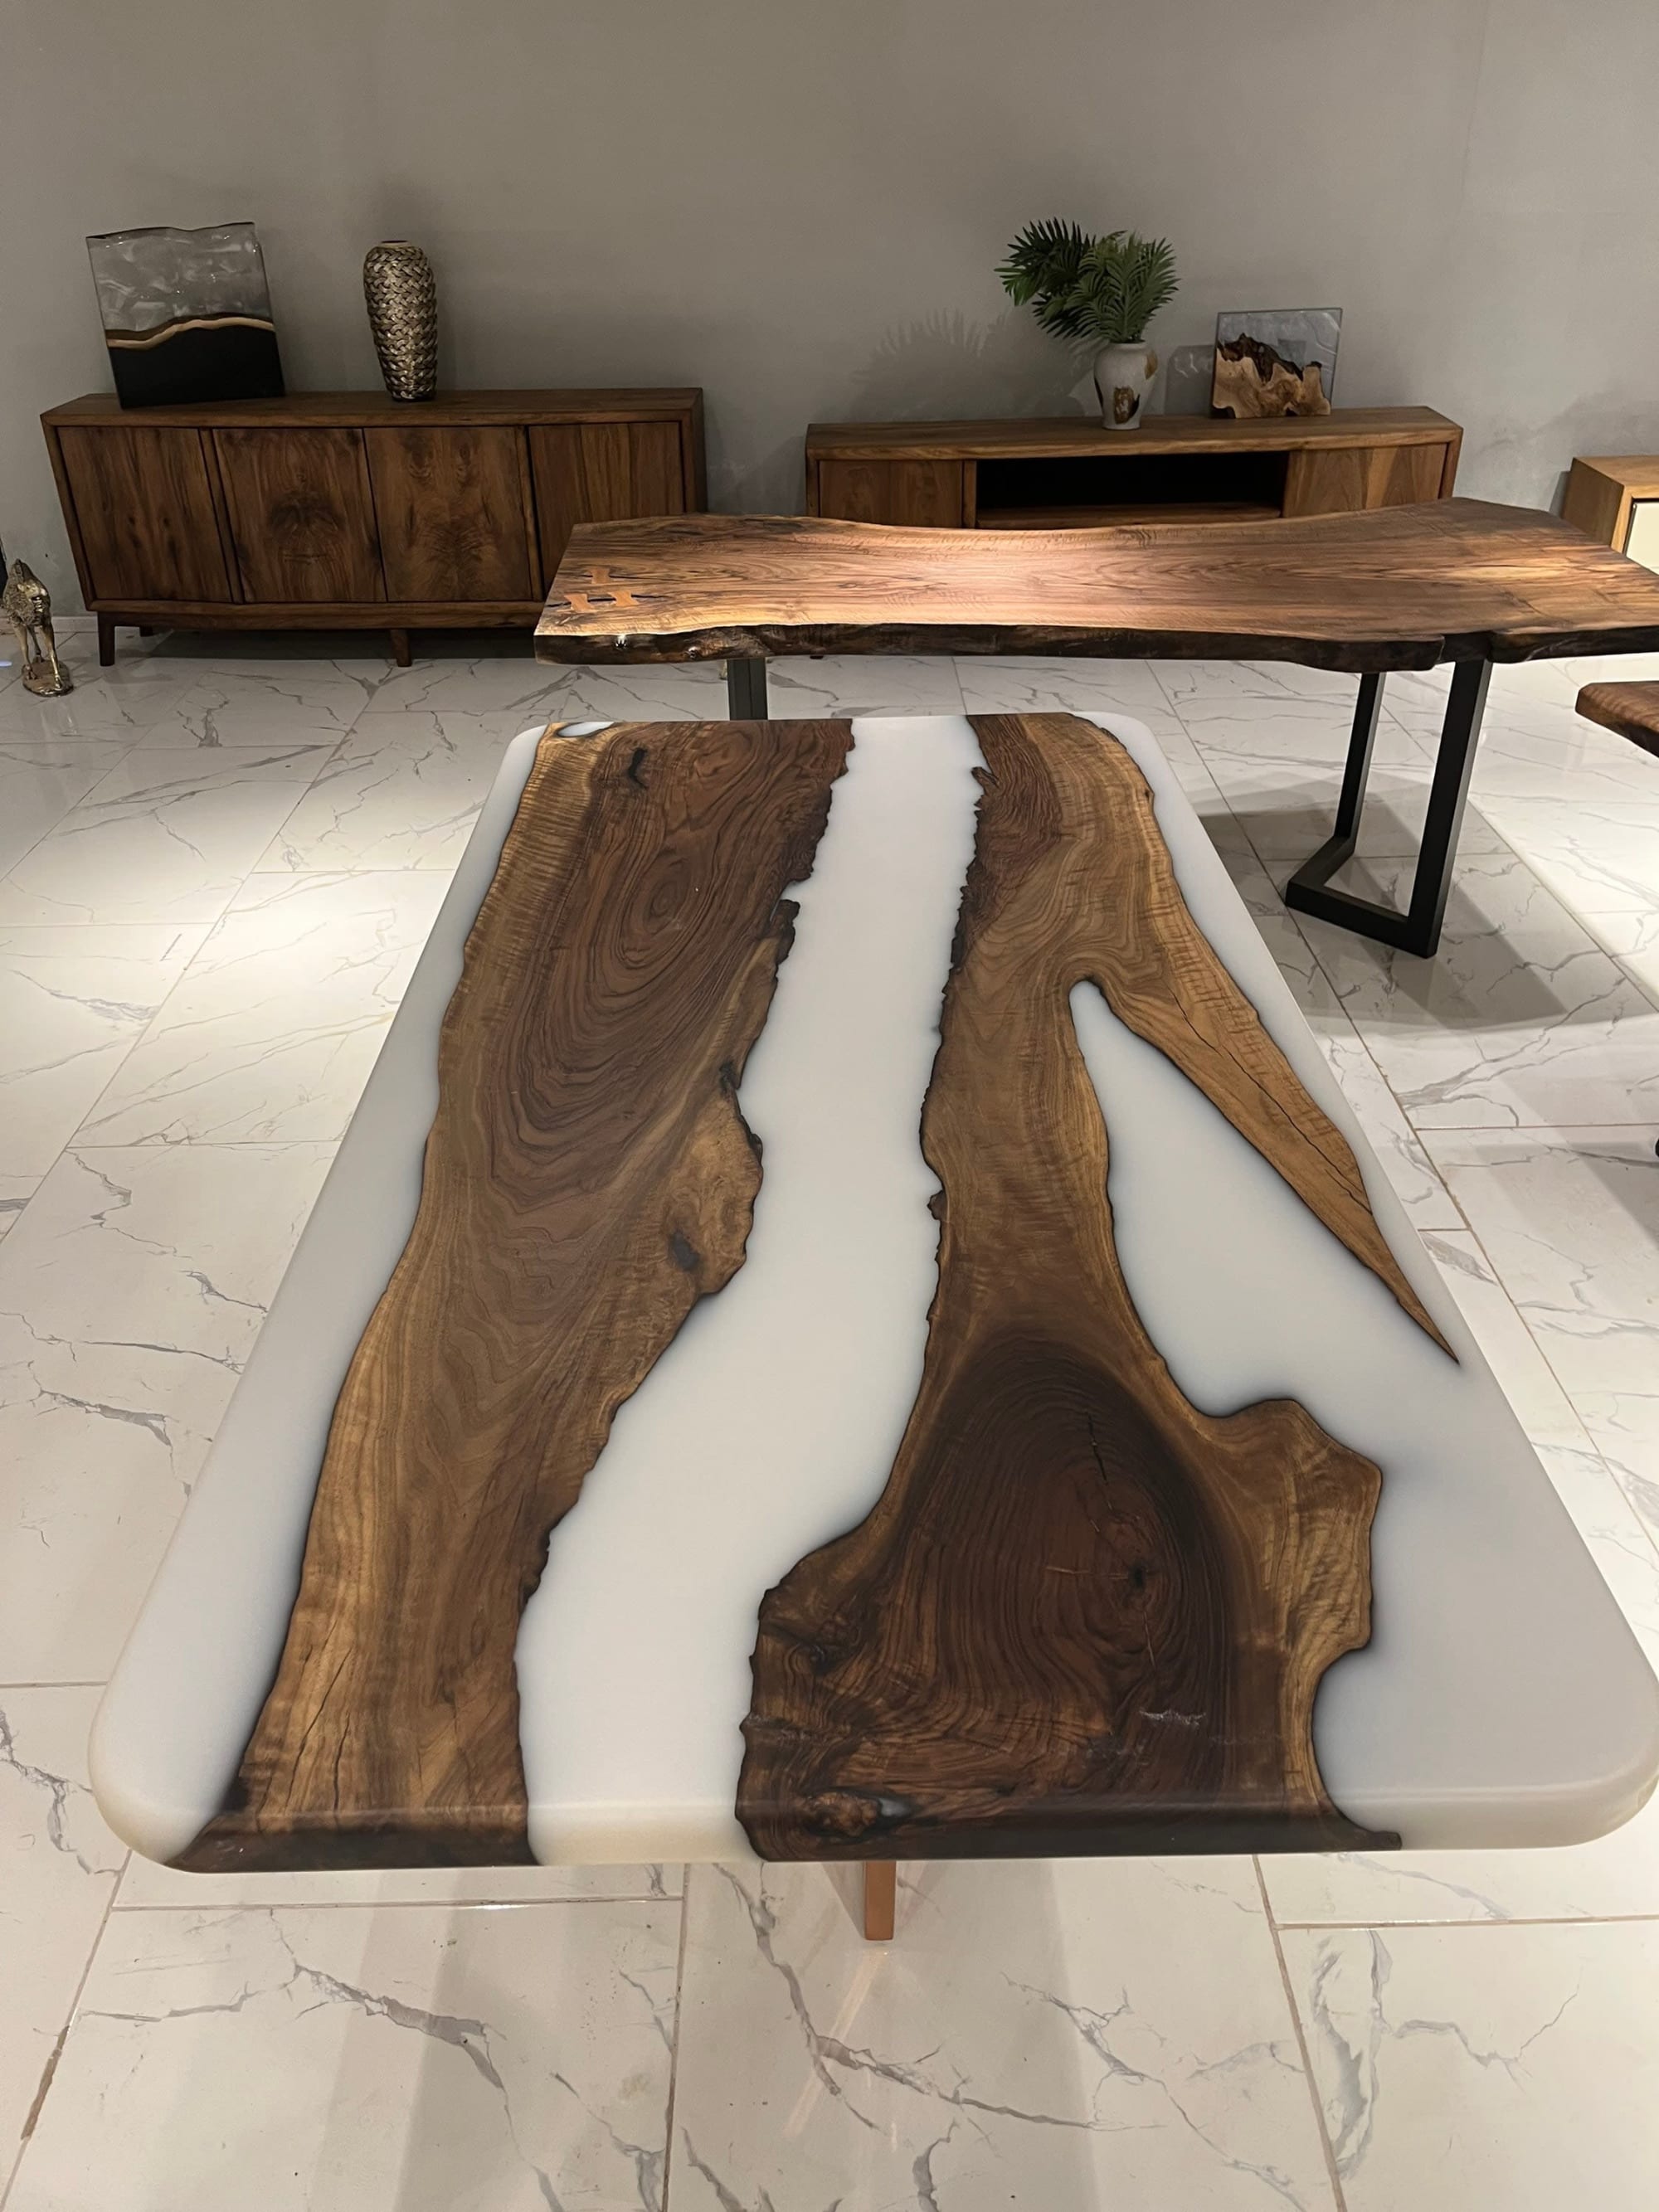 White Epoxy Table - White Resin Table - Custom Dining Table by